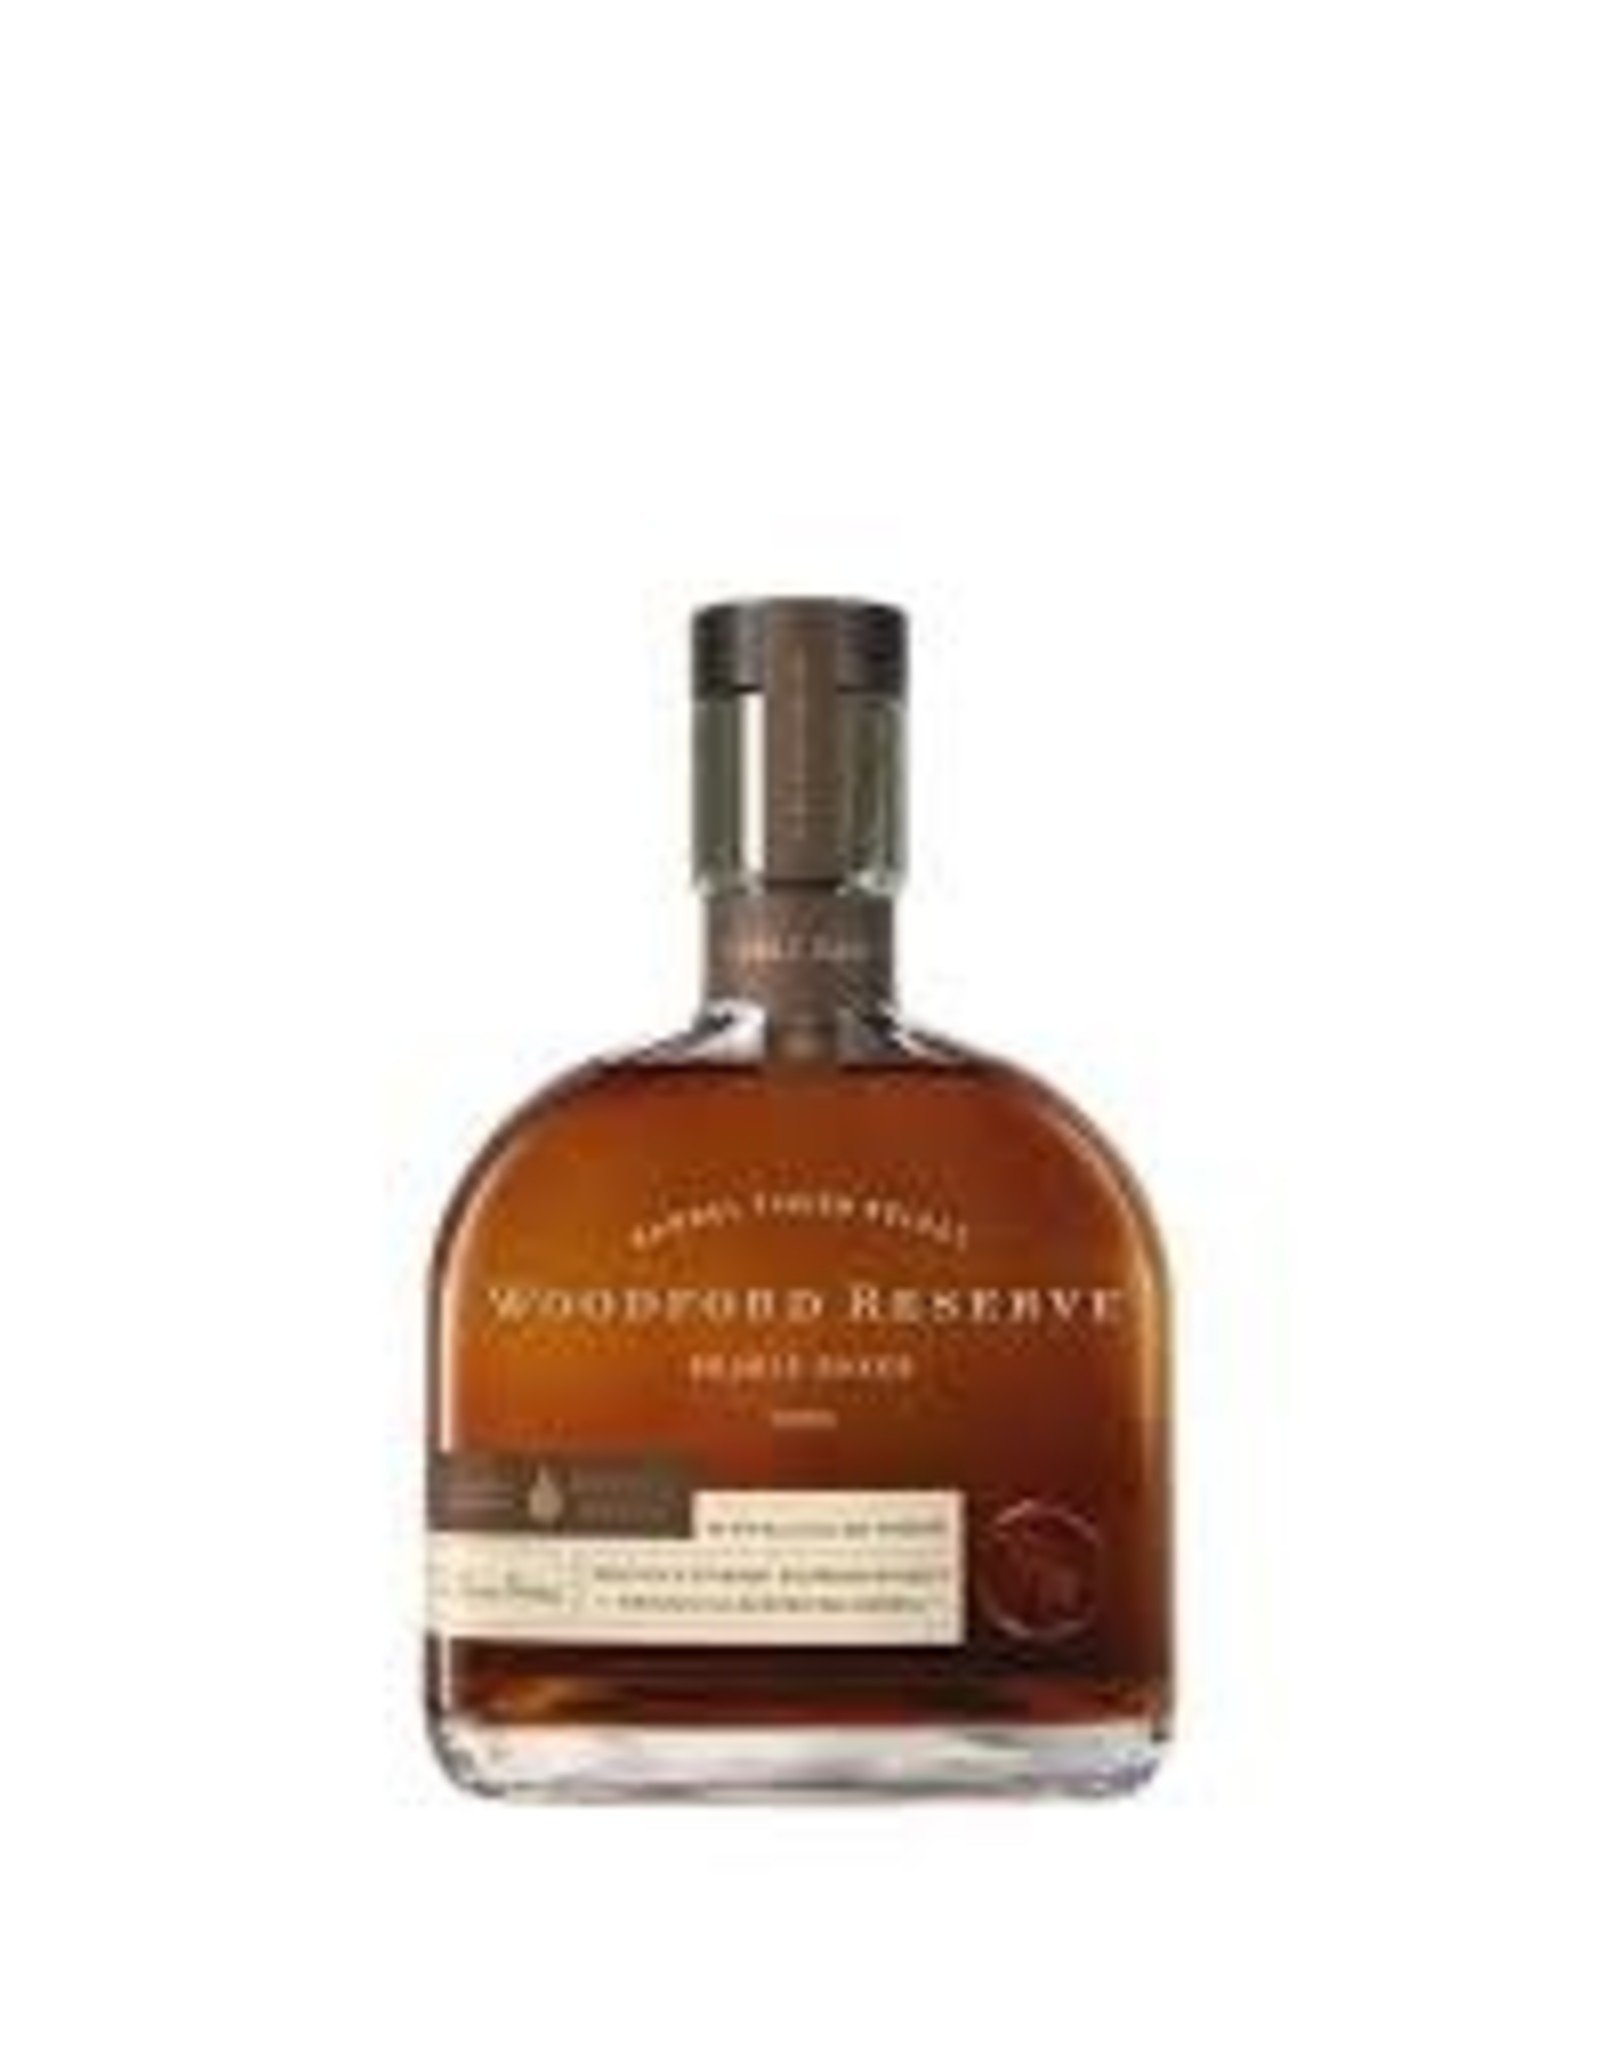 Woodford Woodford Reserve Double Oaked Bourbon Whiskey - The Hut 